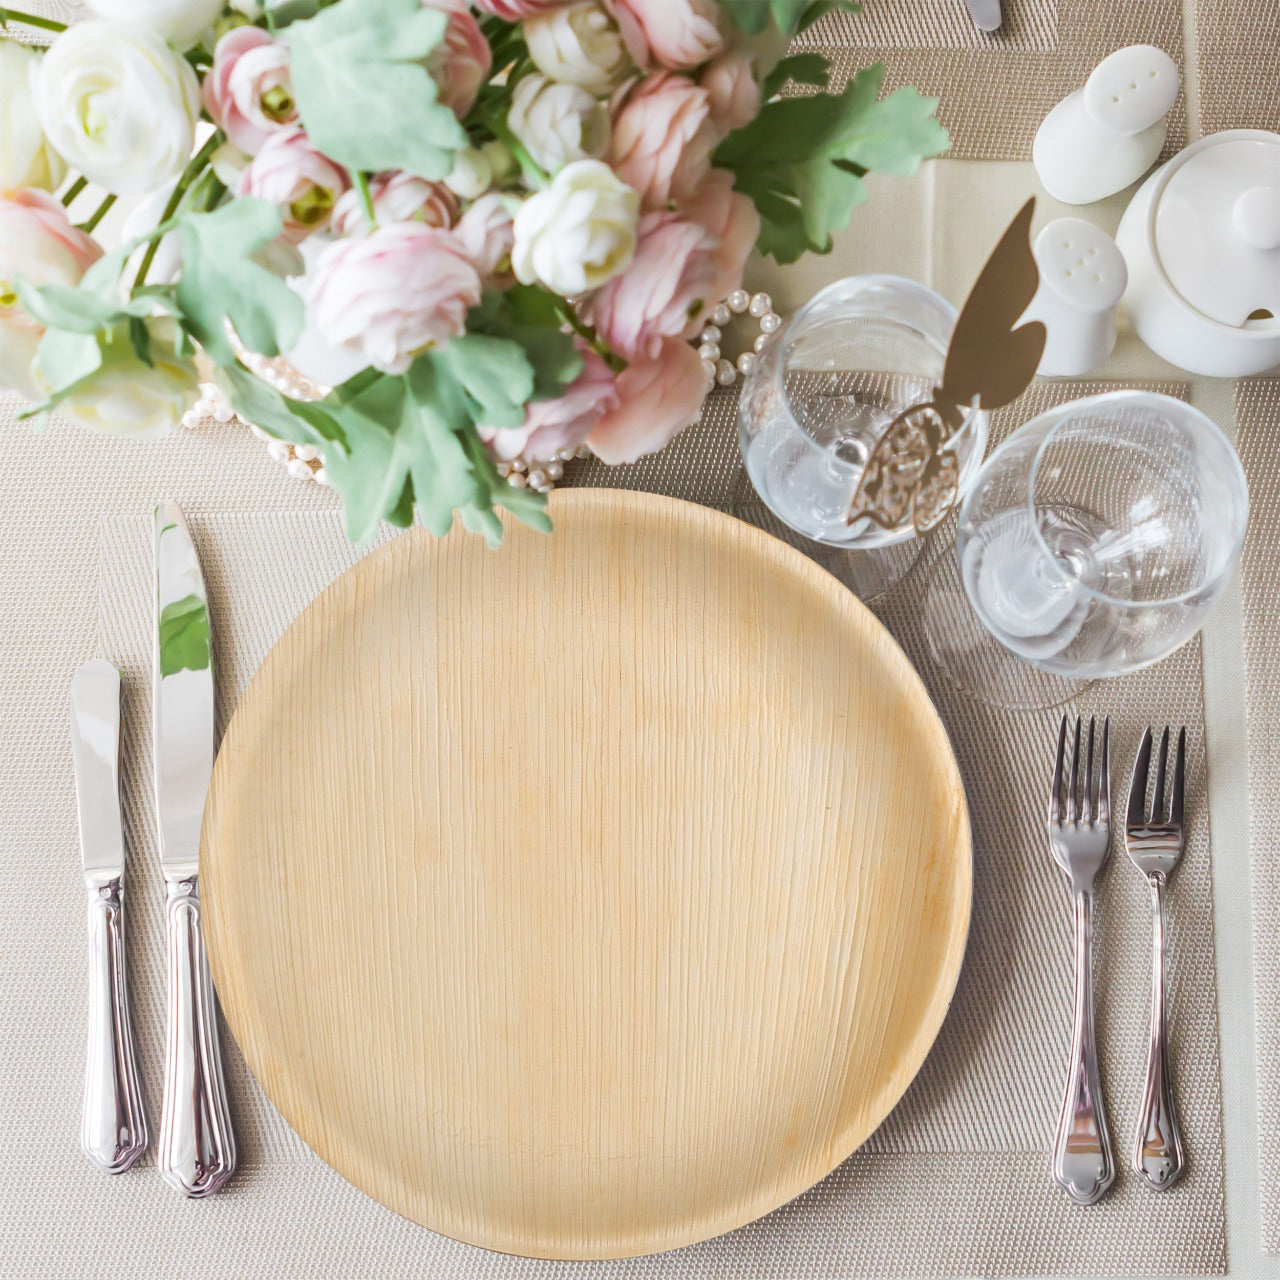 Eco-Friendly Entertaining Made Easy with Palm Leaf Disposable